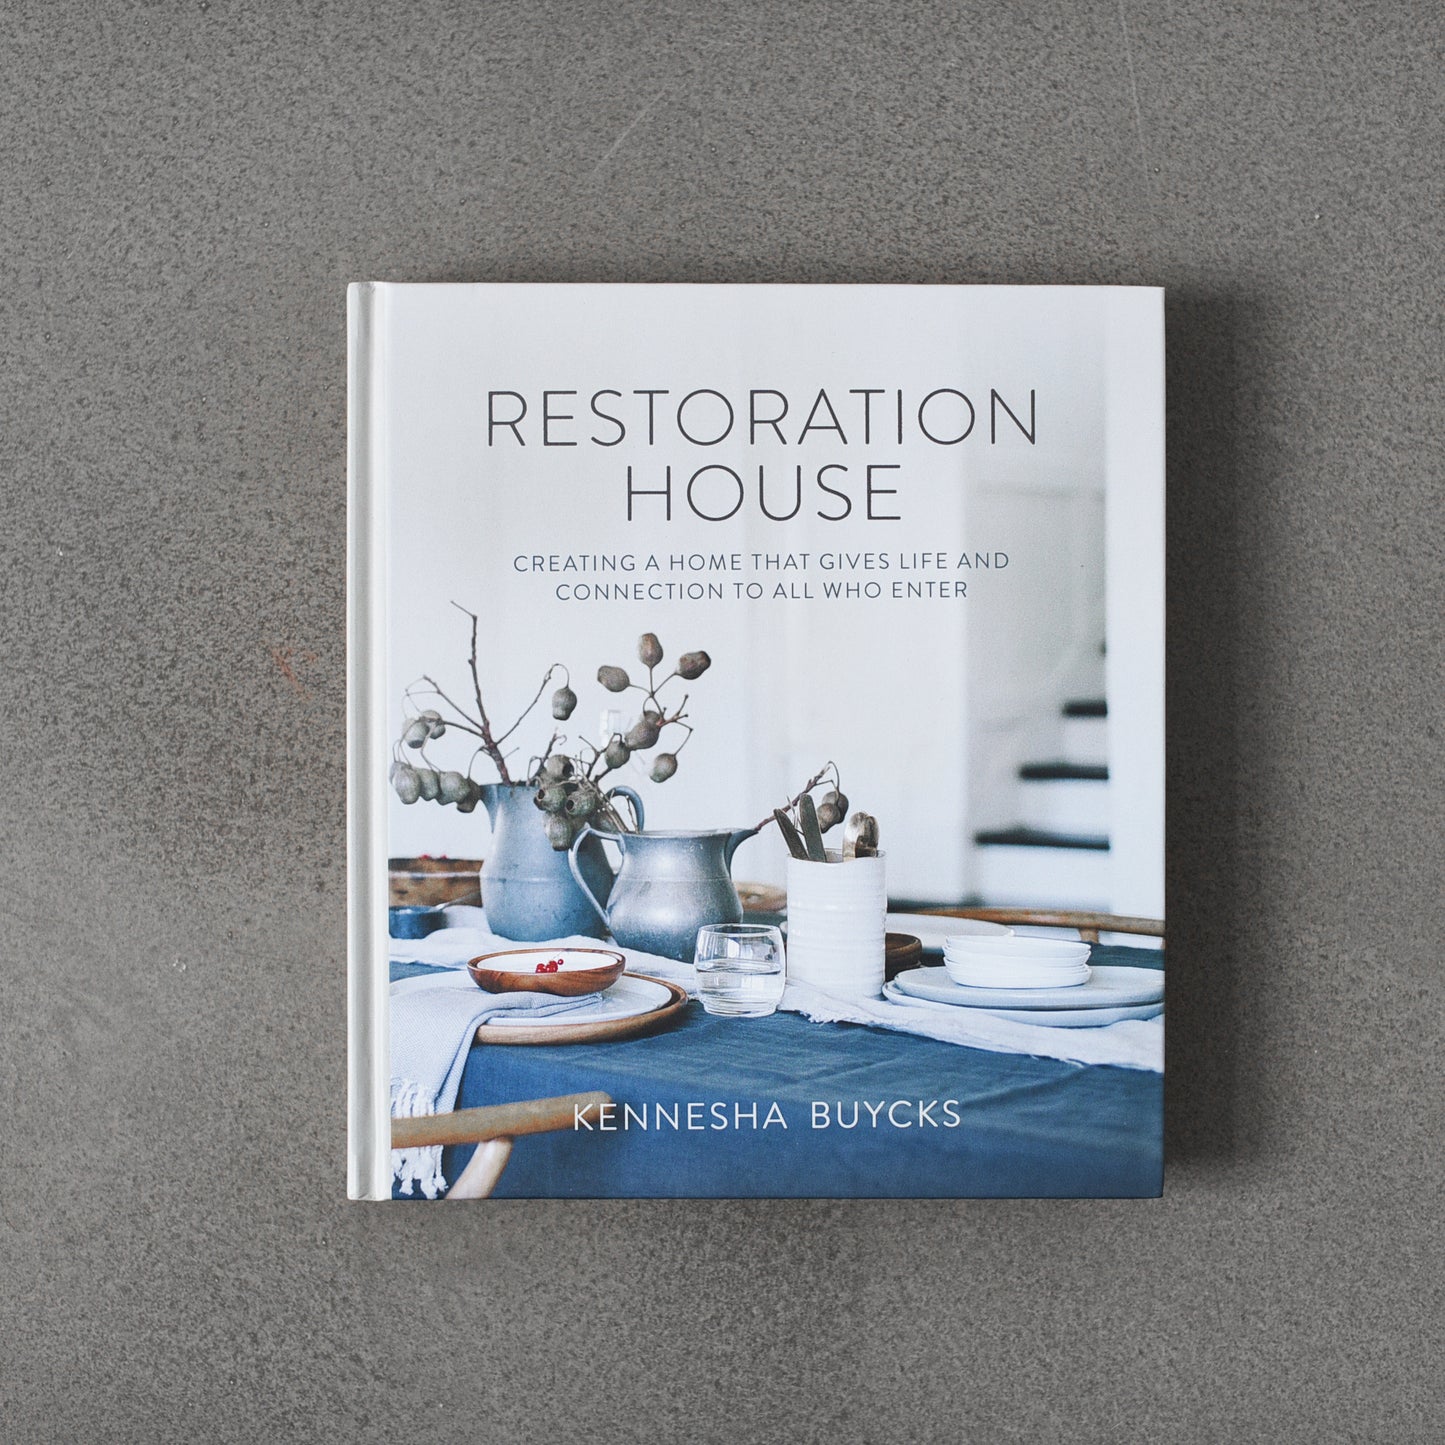 Restoration House: Creating a Home That Gives Life and Connection to All Who Enter